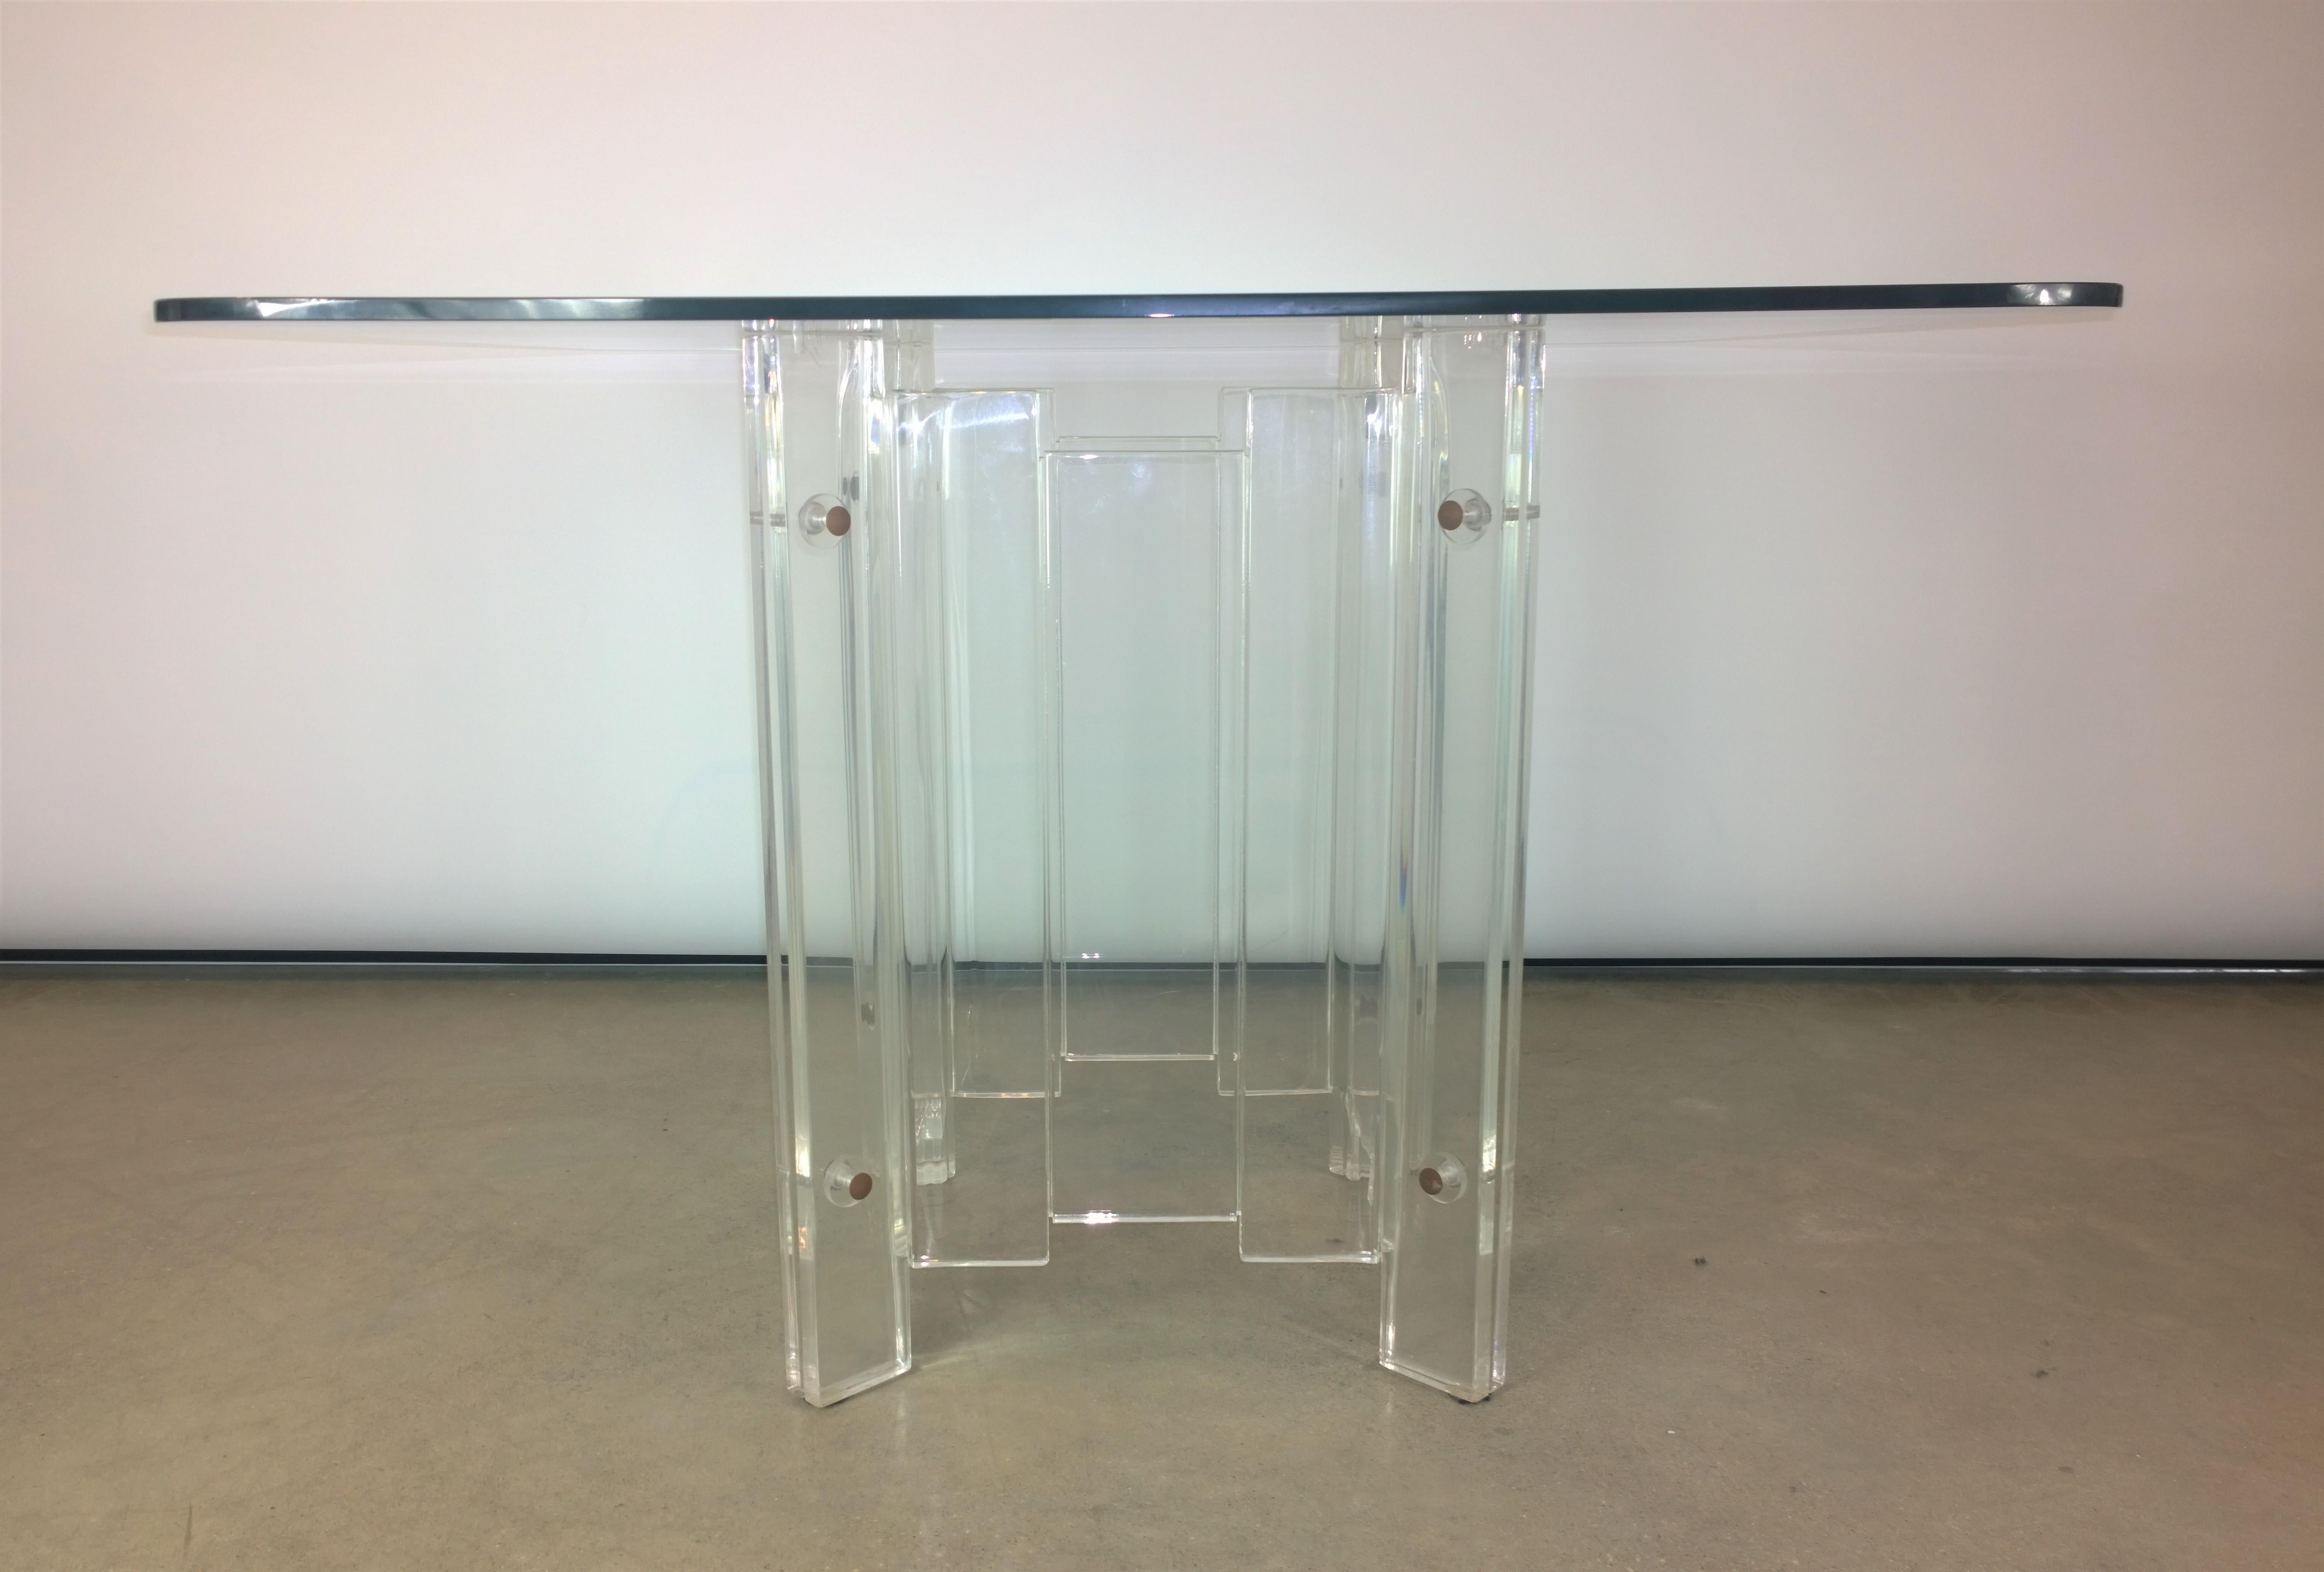 Offered is a Mid-Century Modern Brutalist style Lucite square pedestal and rounded edged square glass top dining, center, game table by Hill Manufacturing. The Lucite base has an Art Deco / Brutalist feel in its design. Hill Manufacturing was one of